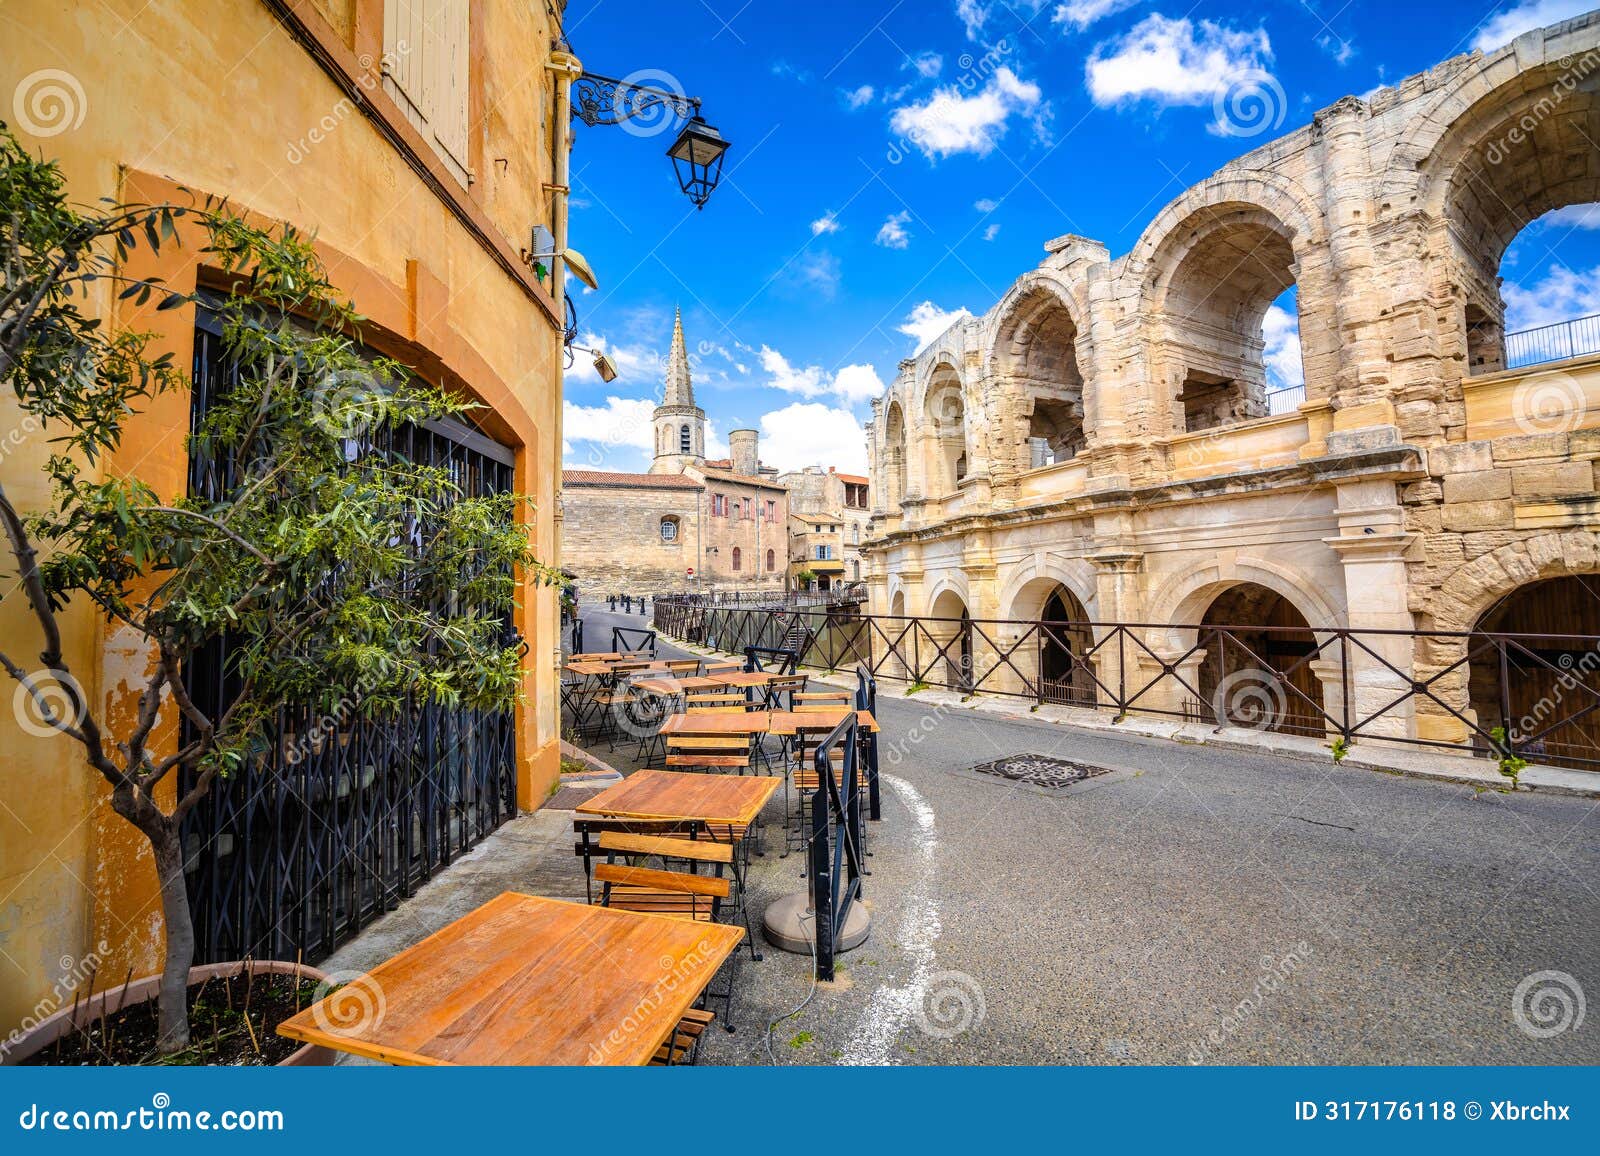 arles amphitheatre and colorful street architecture view